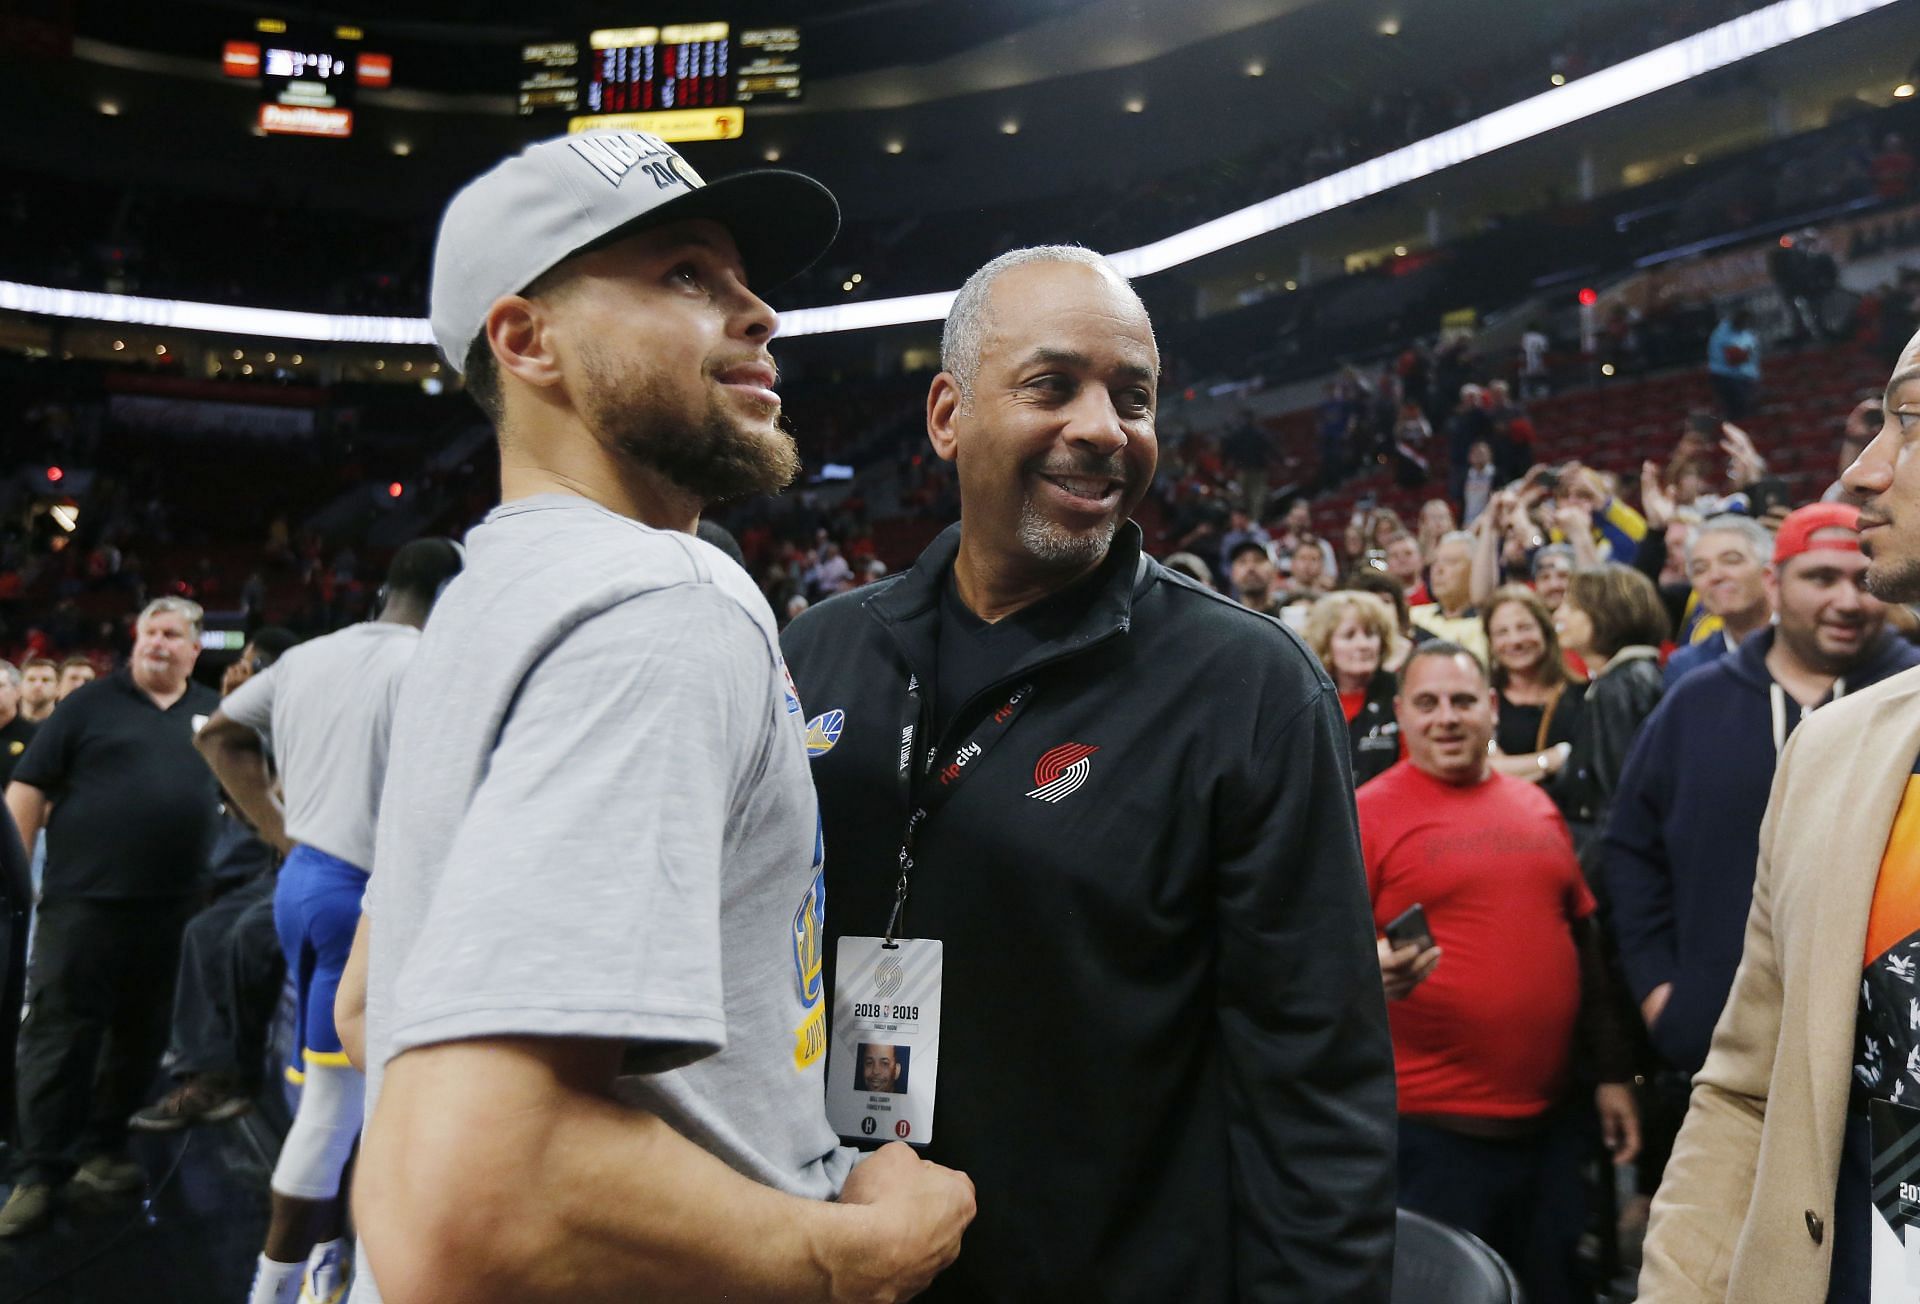 Dell Curry and Steph Curry